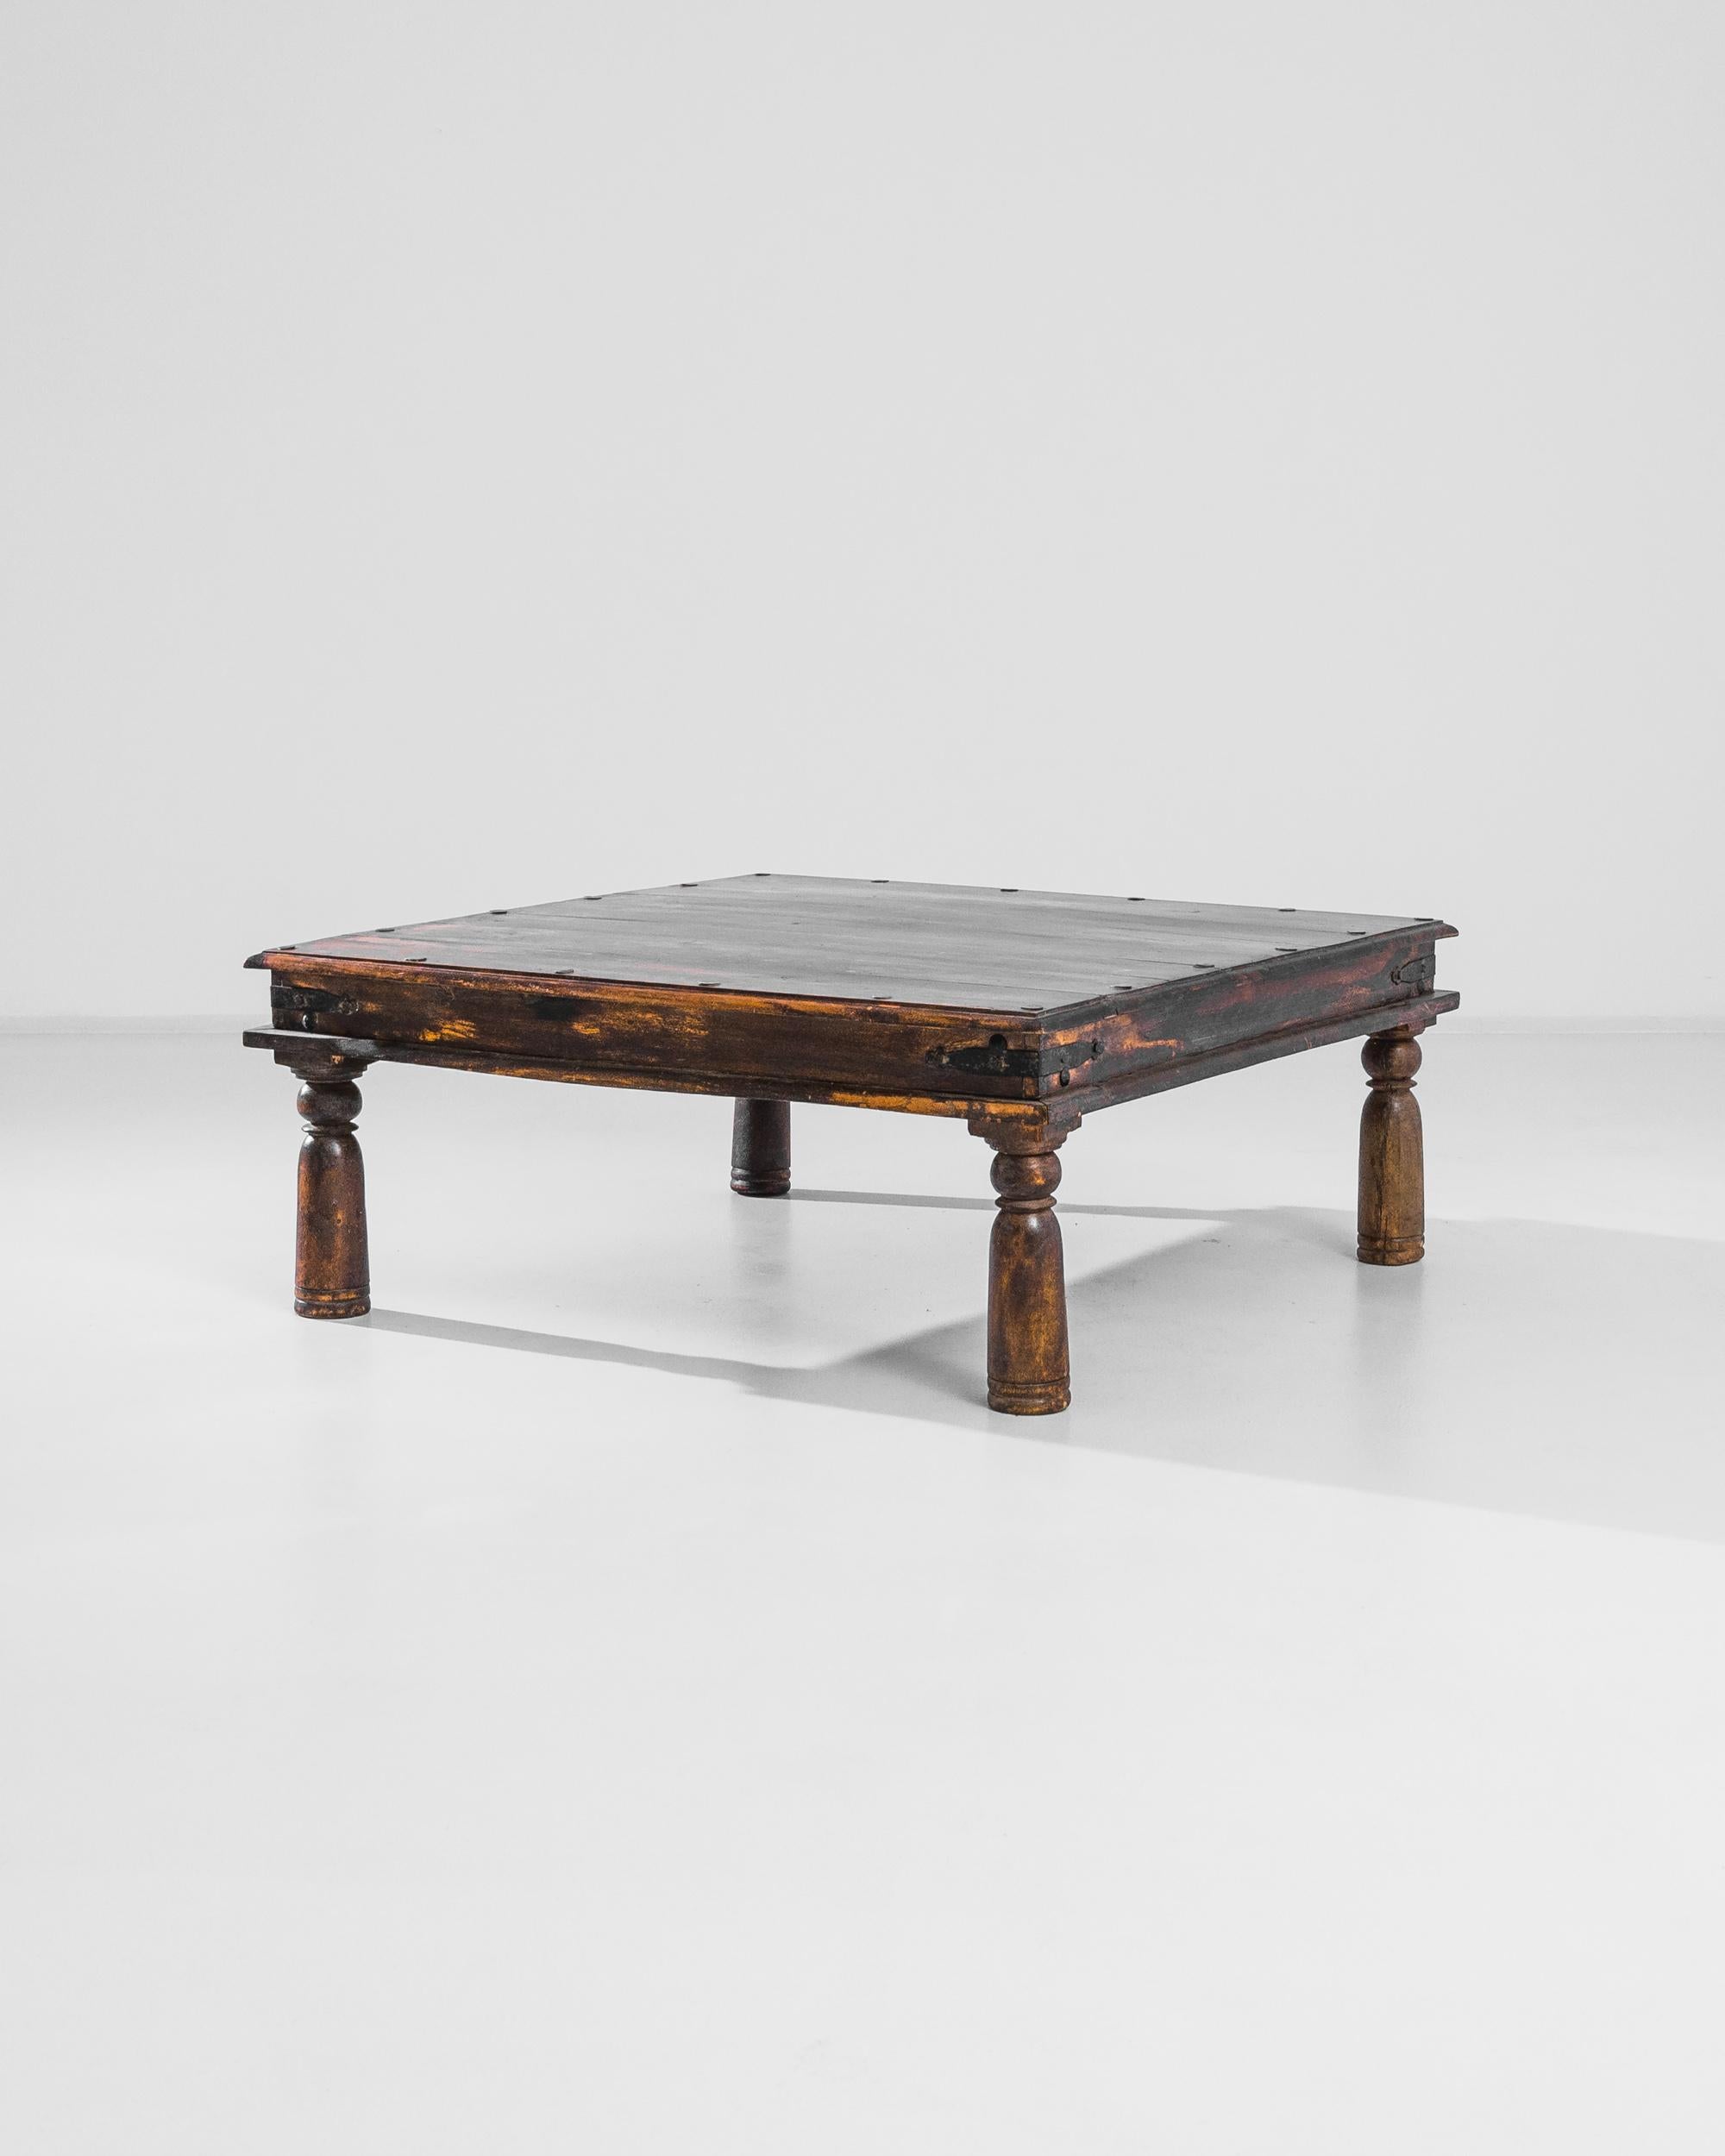 A wooden coffee table from India, produced circa 1920. A finely turned antique from the British Raj: low-slung coffee table with iron brackets clamping the corners standing on four cup and ball legs, featuring a border of twenty iron rivets around